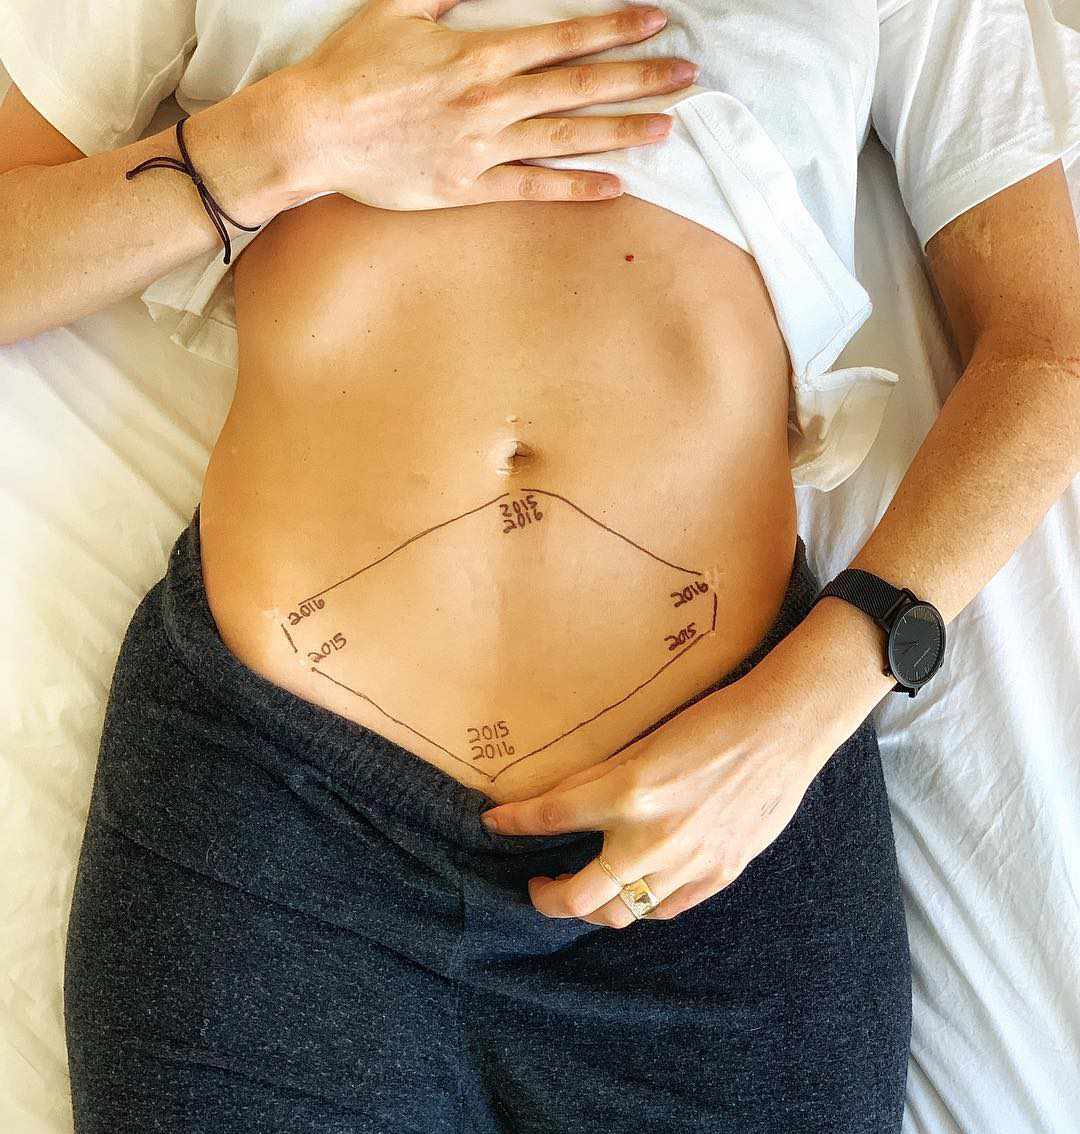 Women Are Sharing Unedited Belly Scar Photos to Show a Side of Endometriosis You Don't Usually See